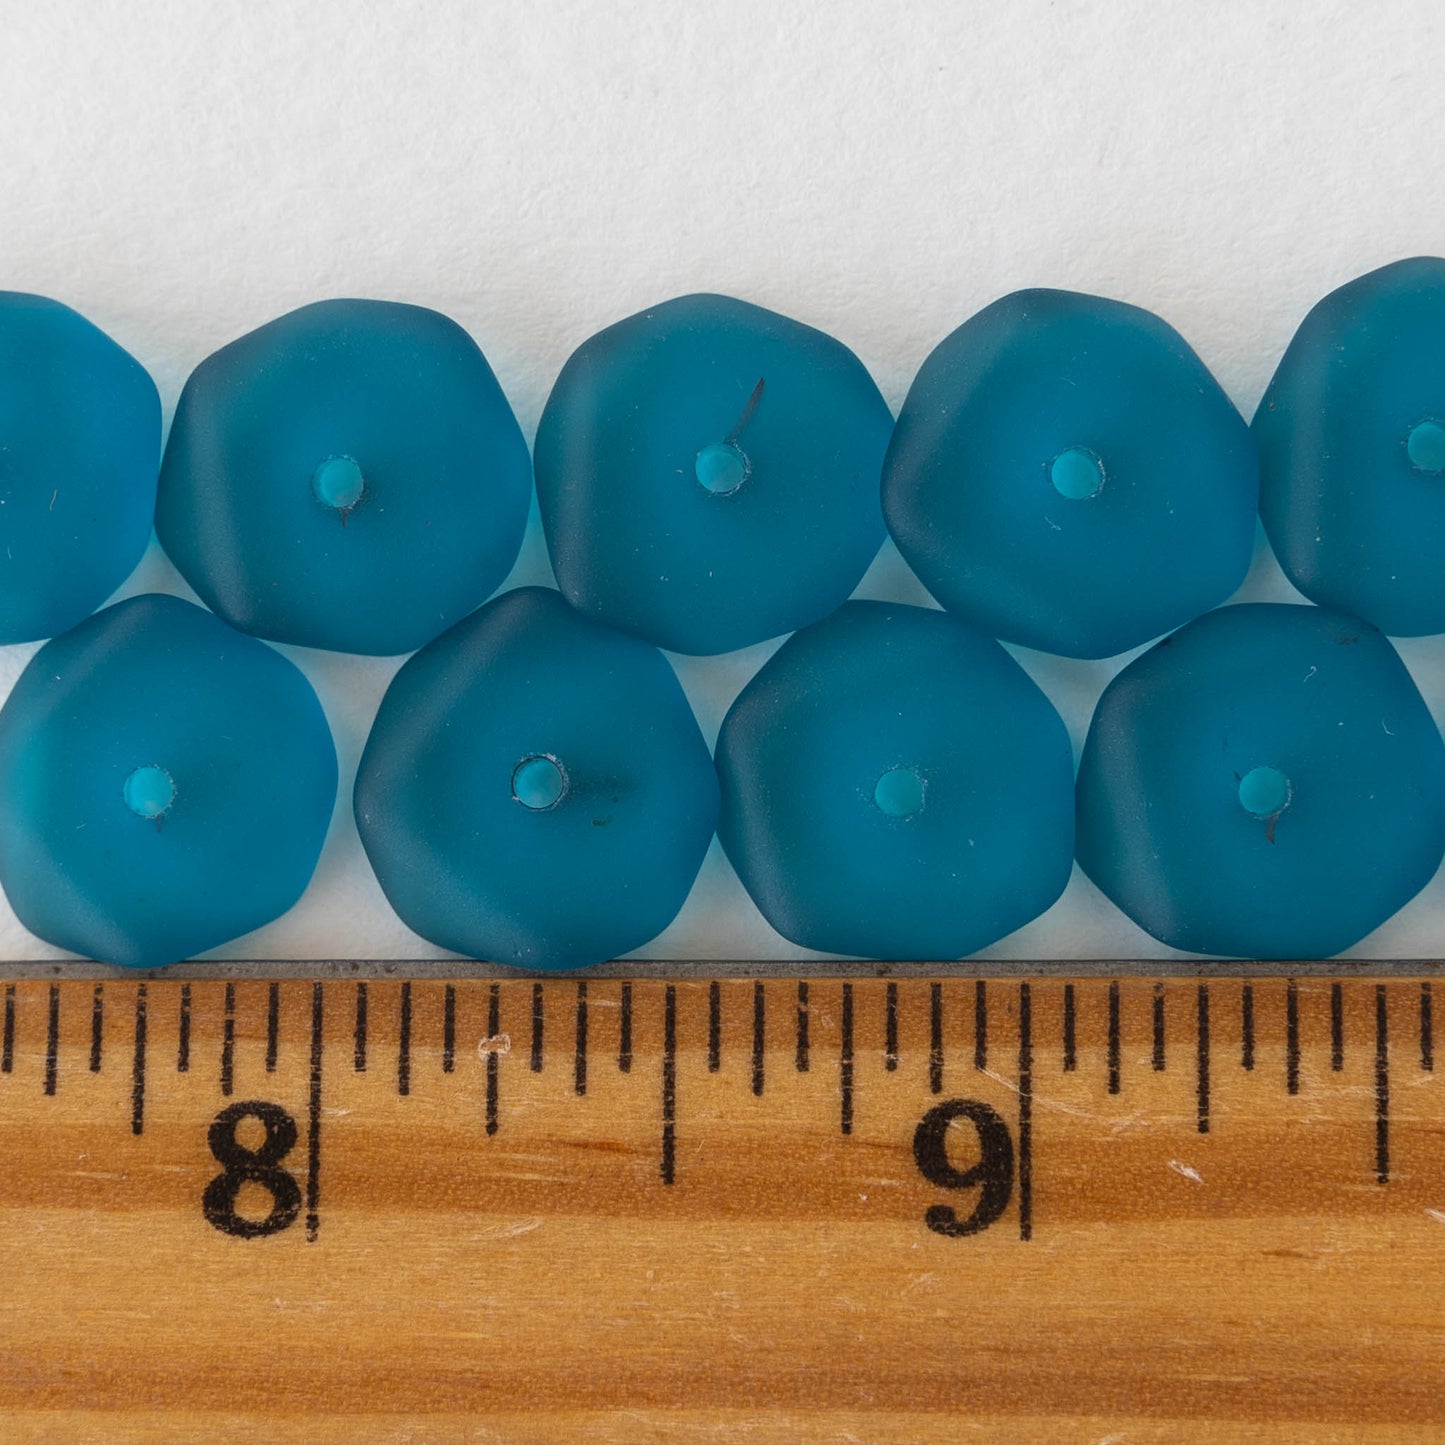 14mm Wavy Rondelle - Teal - 10 Beads